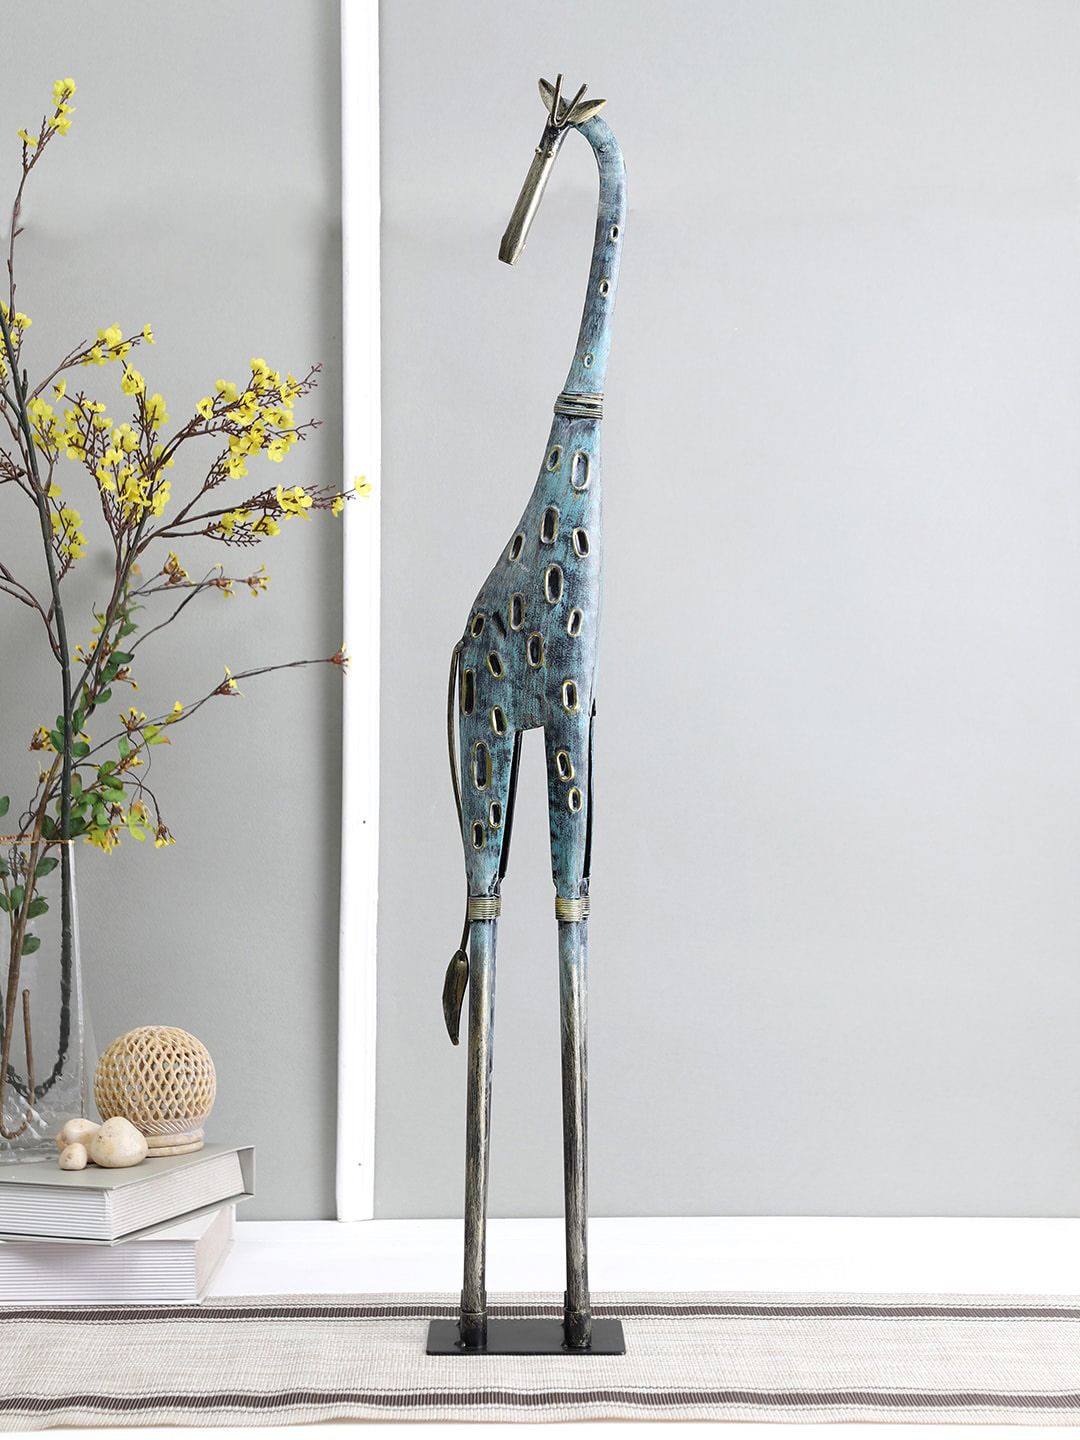 Aapno Rajasthan Pristine and Blue Toned Giraffe Showpiece Price in India